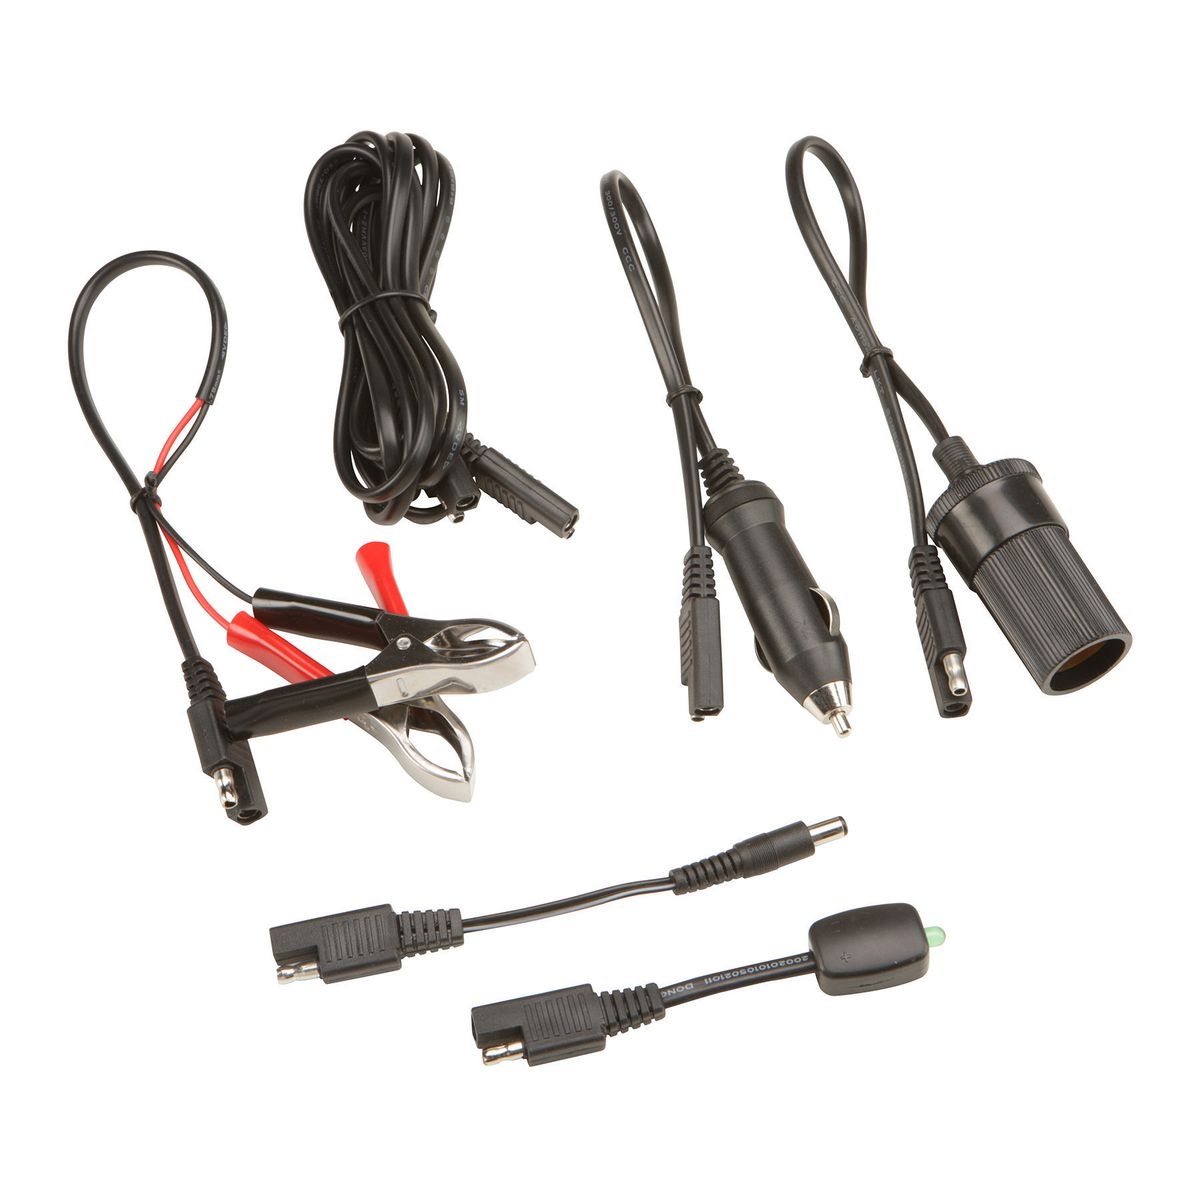 THUNDERBOLT Solar Power Connection Cable Kit - Item 63981 / 68684